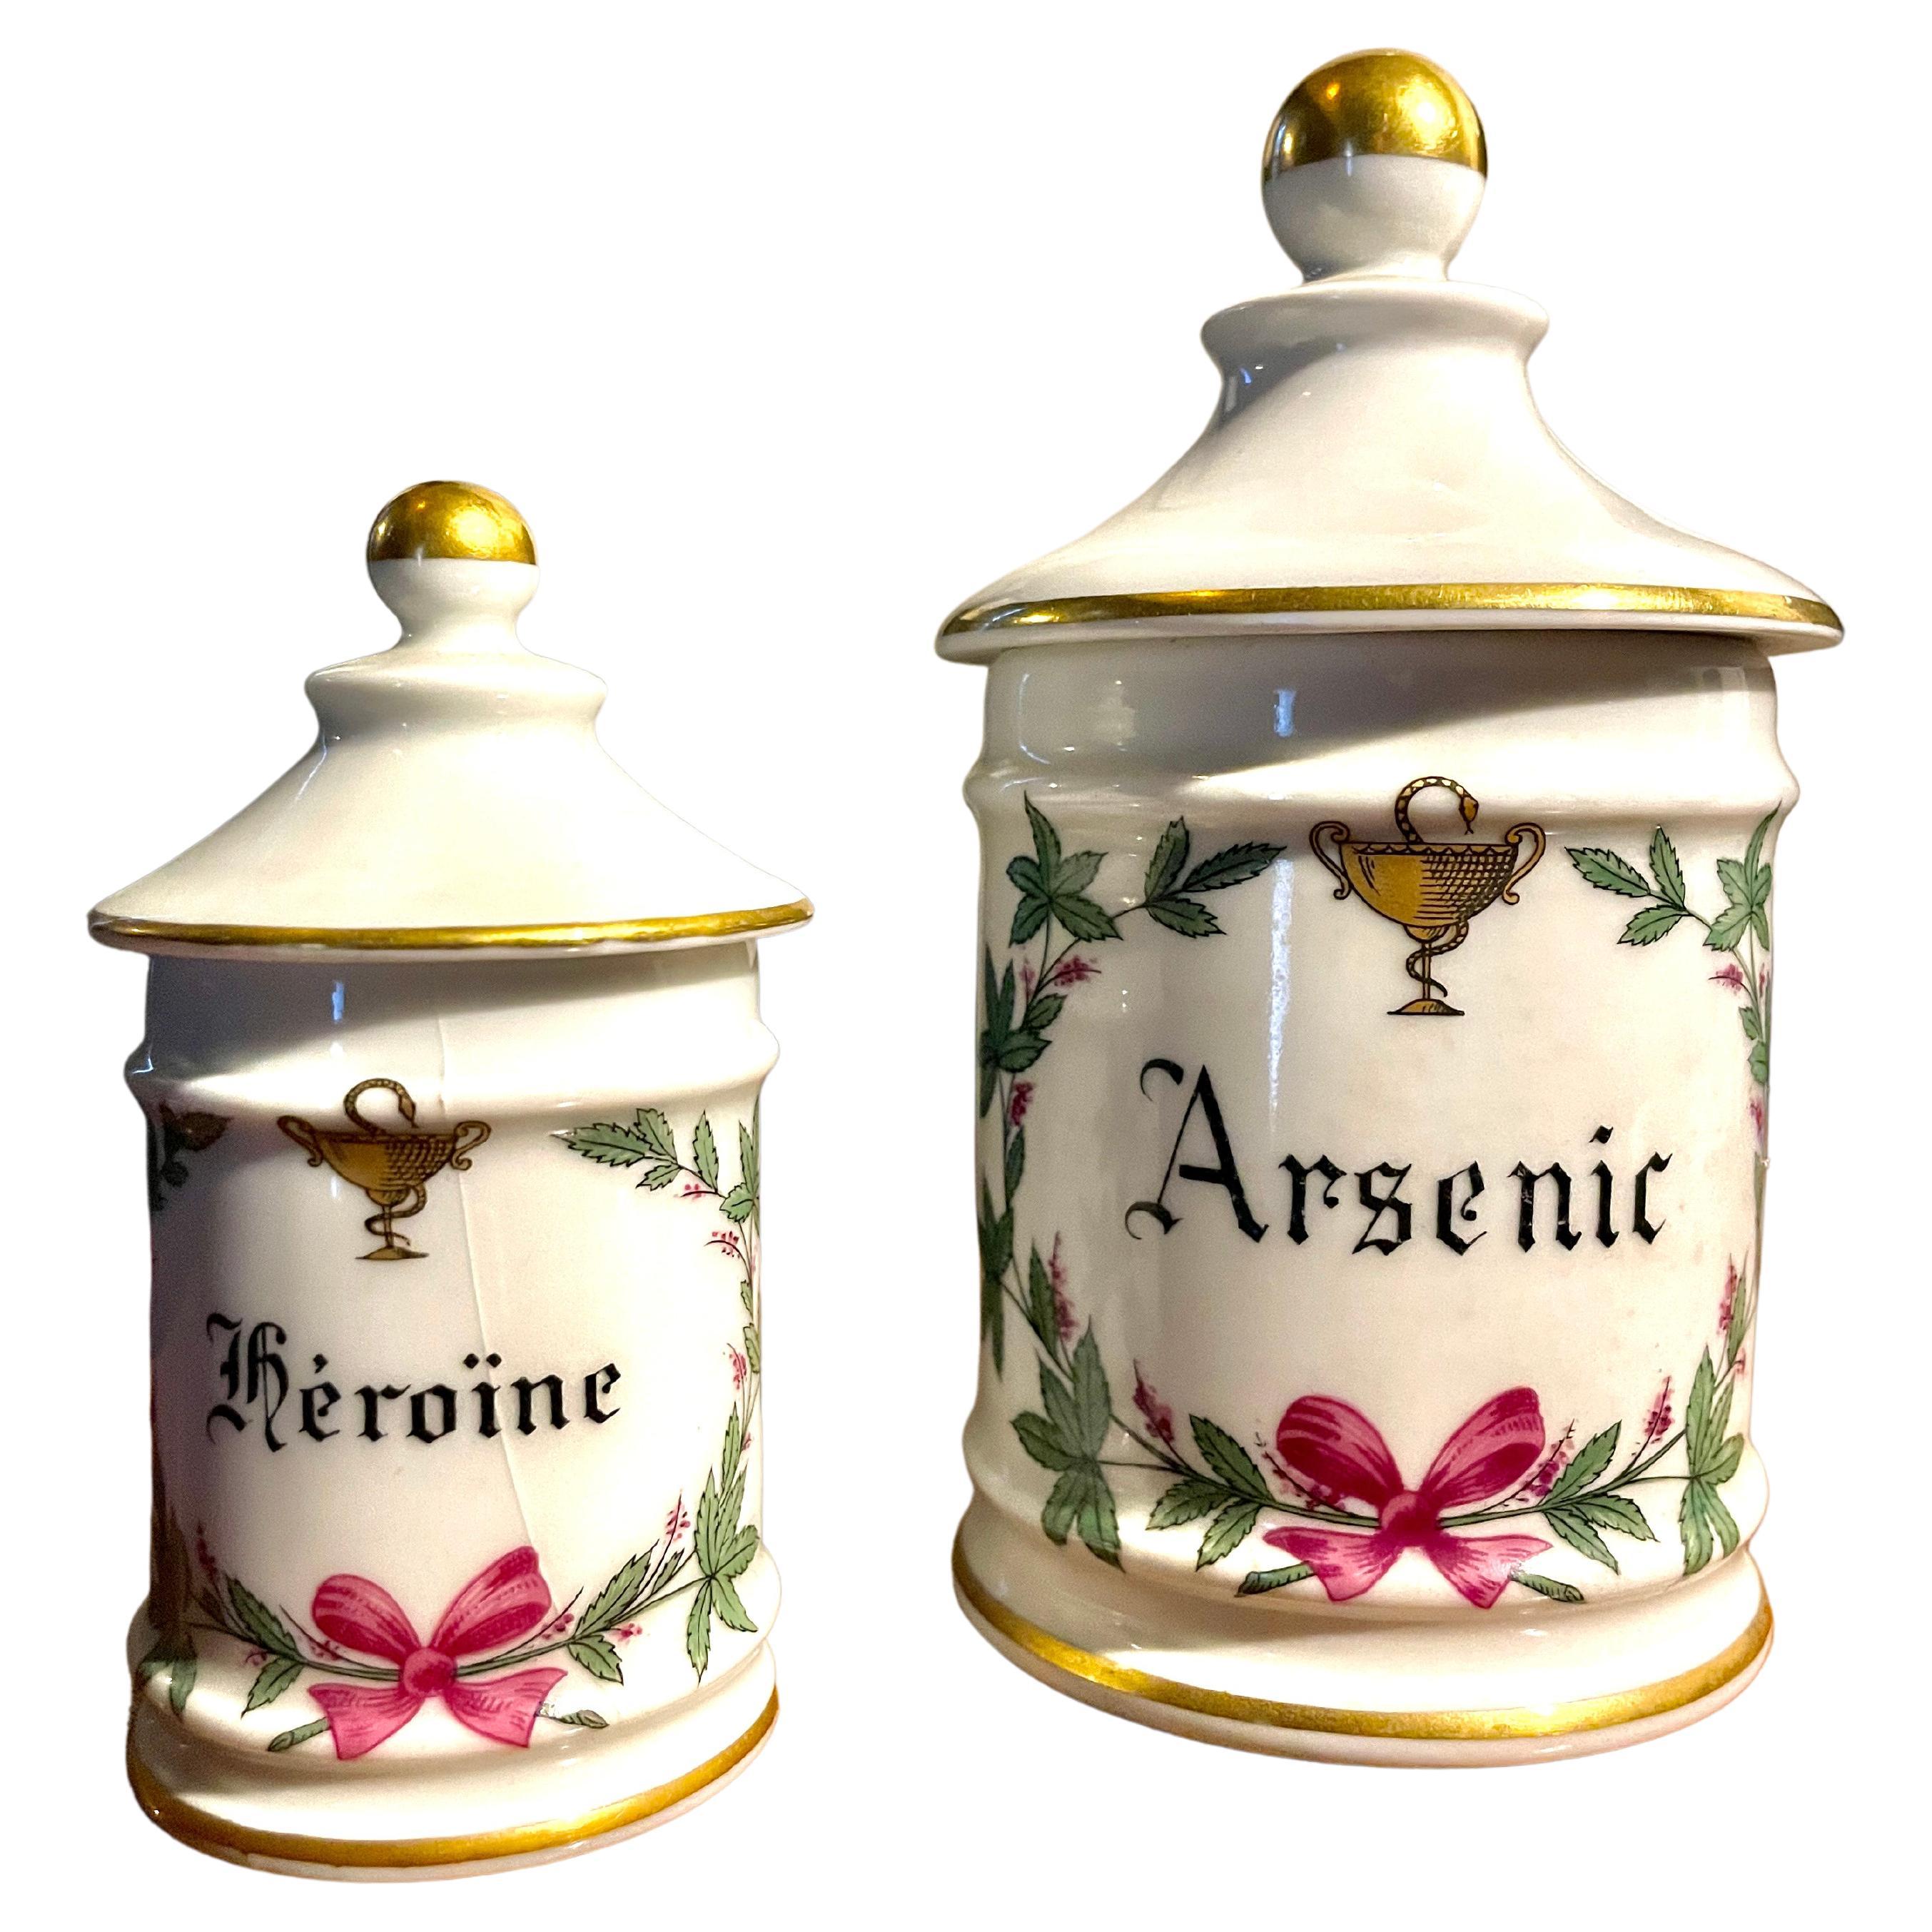 Set of 2 French Apothecary Jar Arsenic and Heroin 19th Porcelain Limoges Drug